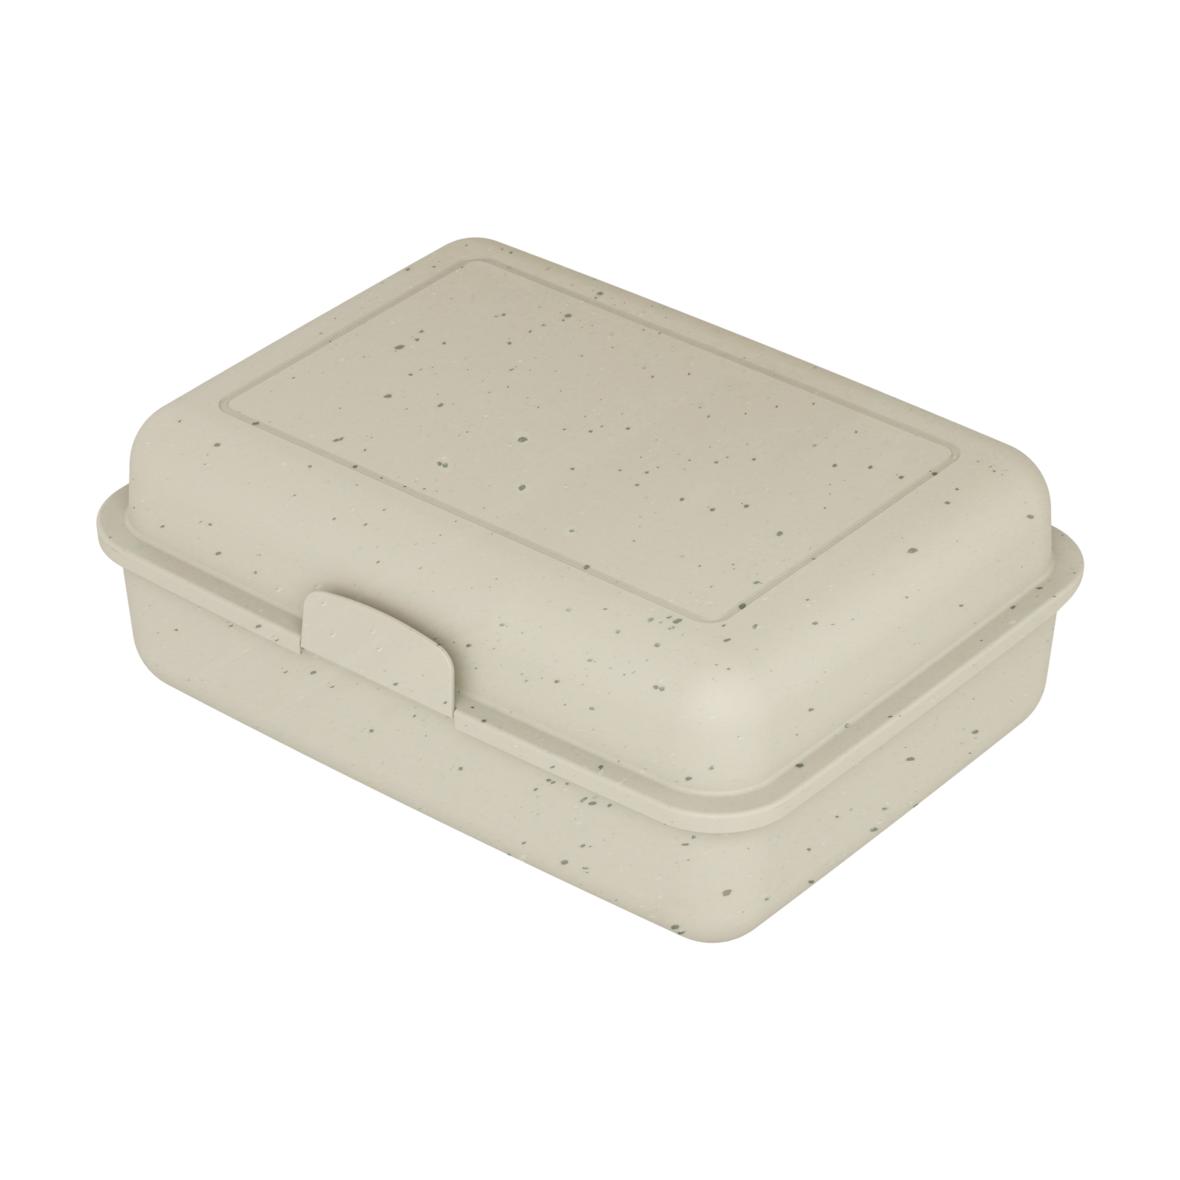 Lunch Box made from Bioplastic Certified by ISCC - Trowbridge